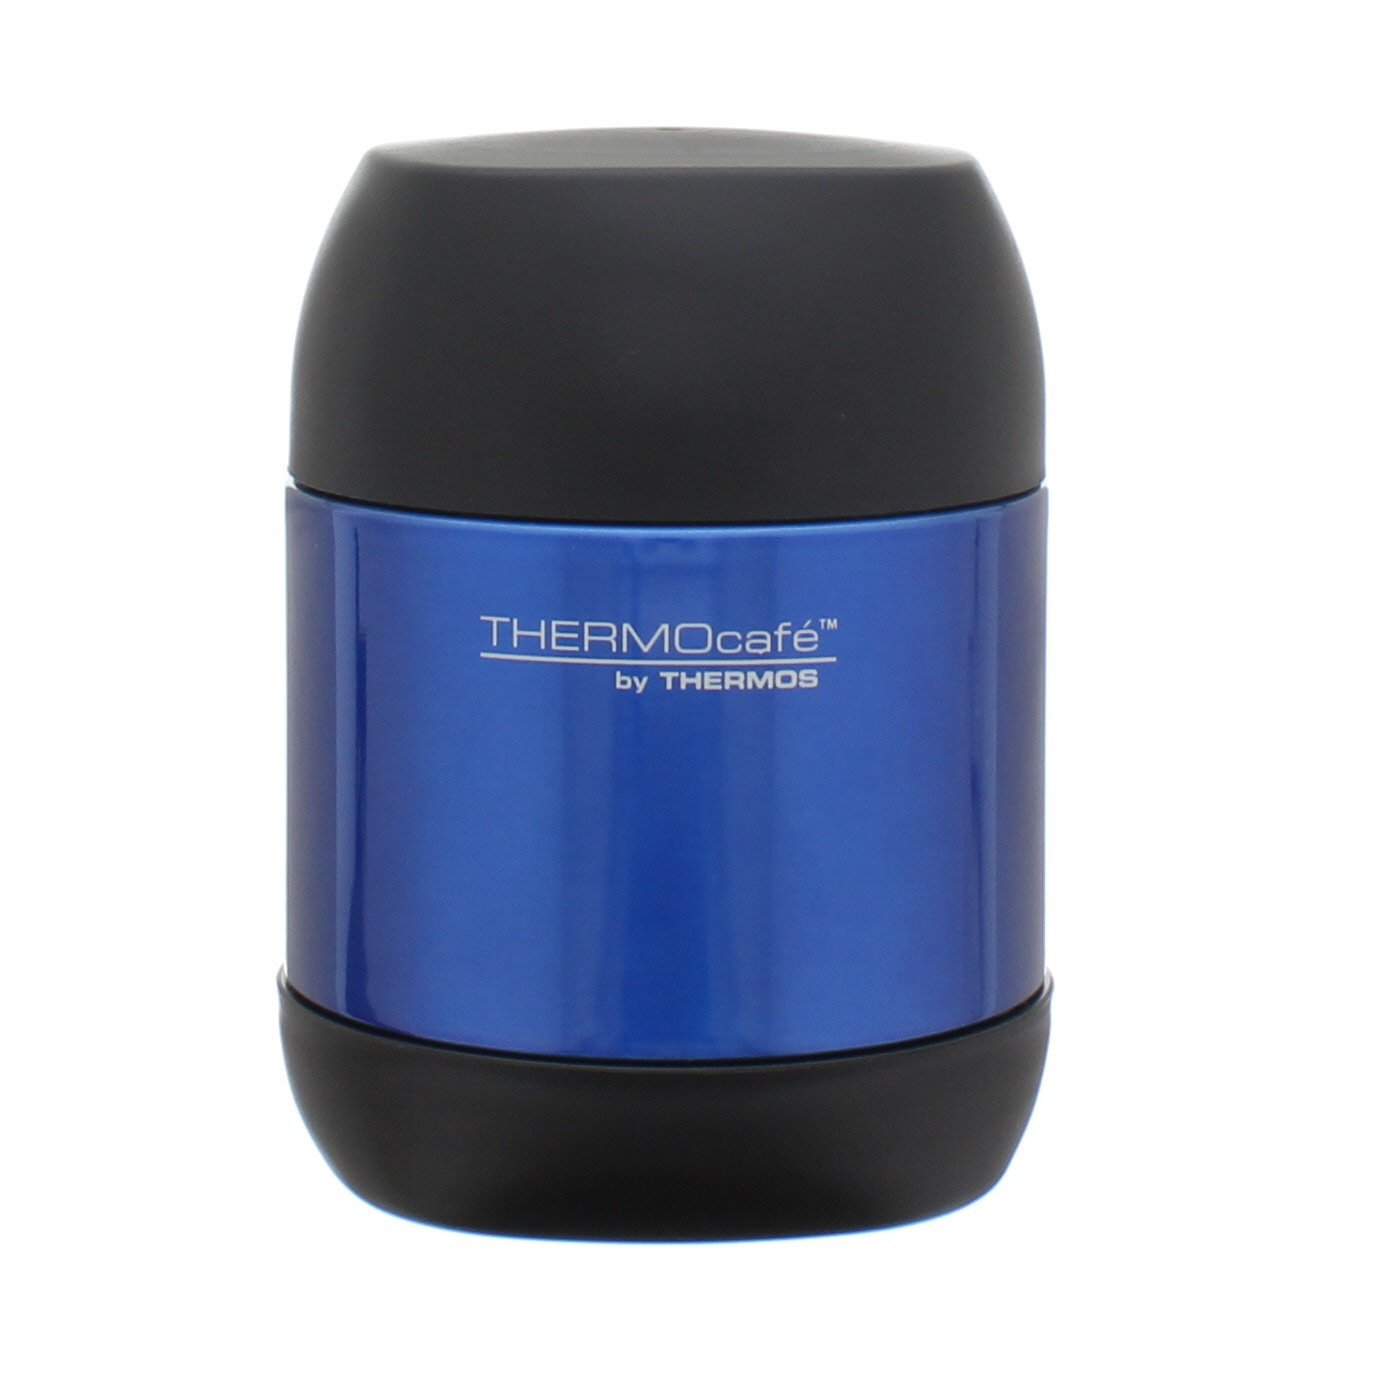 Thermos Kids FUNtainer Stainless Steel Food Jar - Navy - Shop Food Storage  at H-E-B